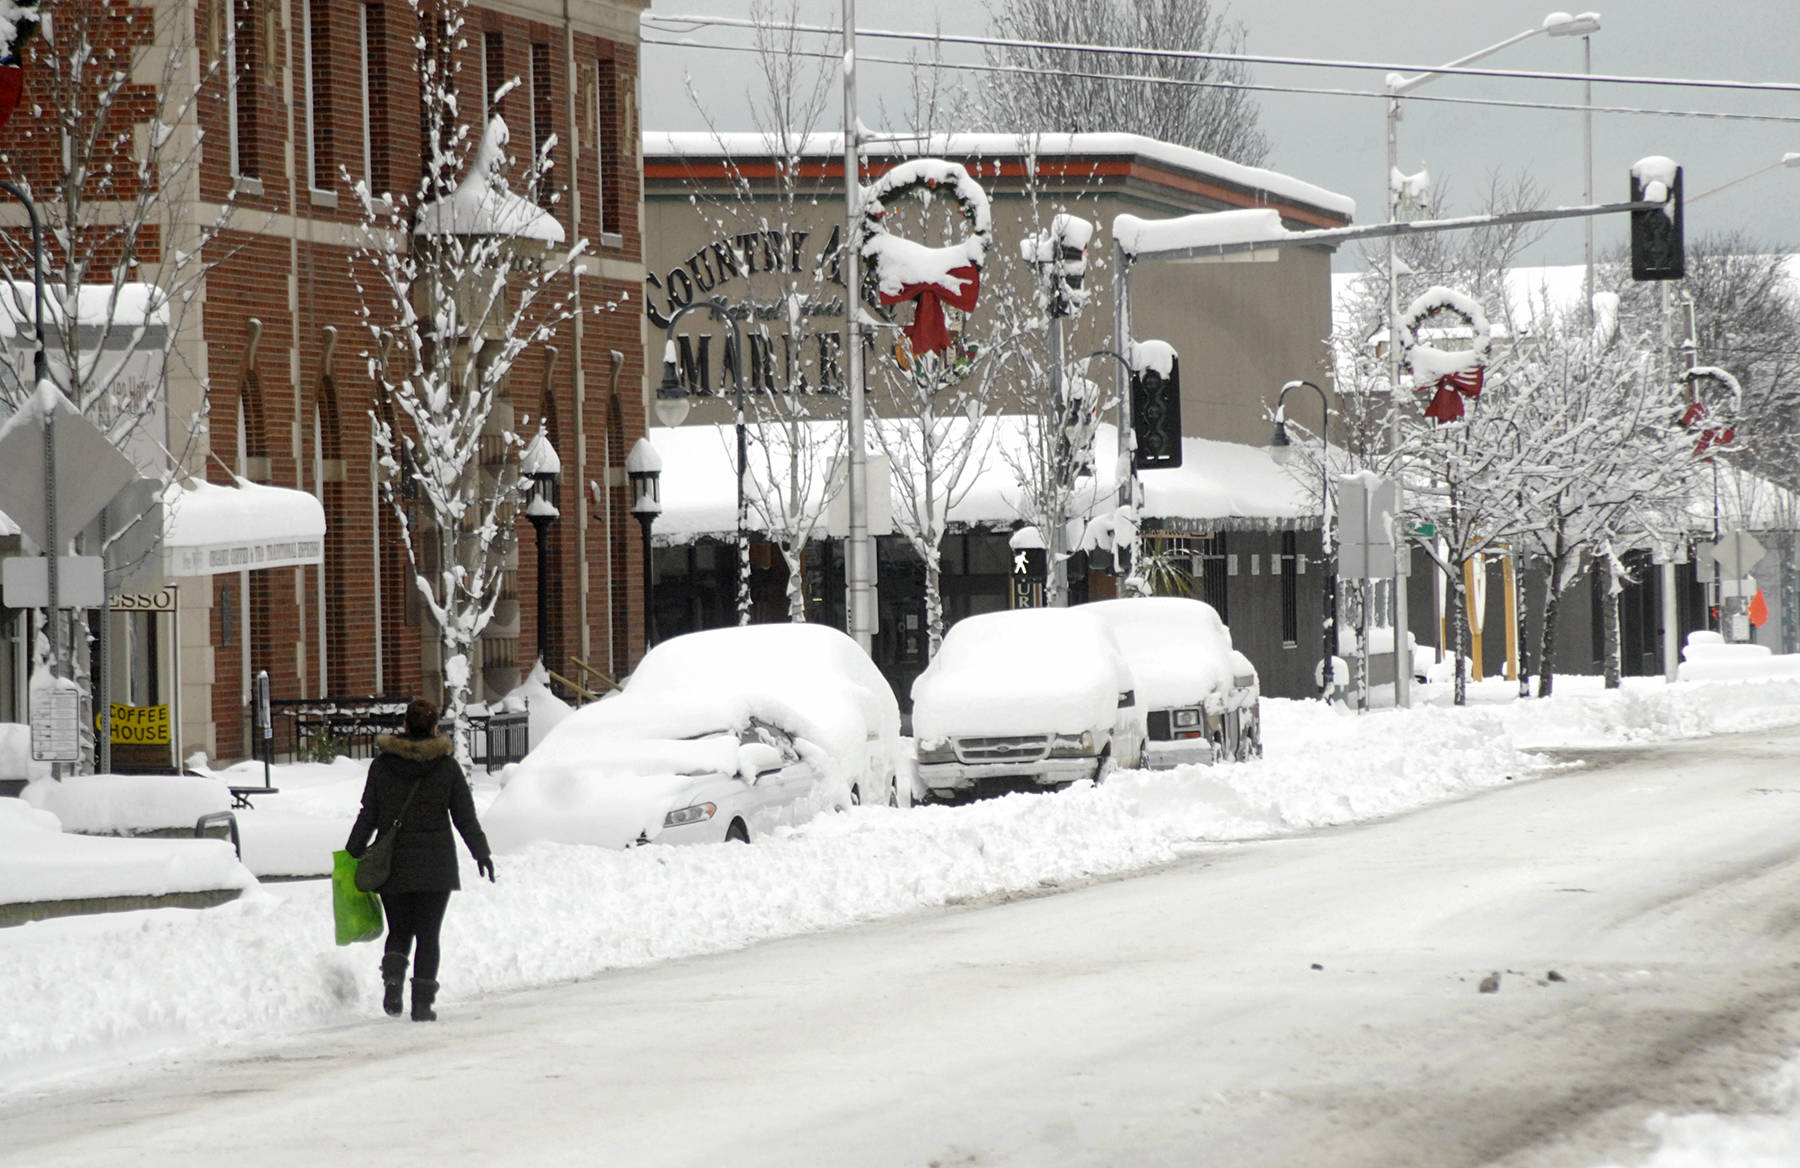 A pedestrian makes her way along a snow-covered Front Street in downtown Port Angeles on Wednesday after heavy snow blanketed the city overnight. (Keith Thorpe/Peninsula Daily News)